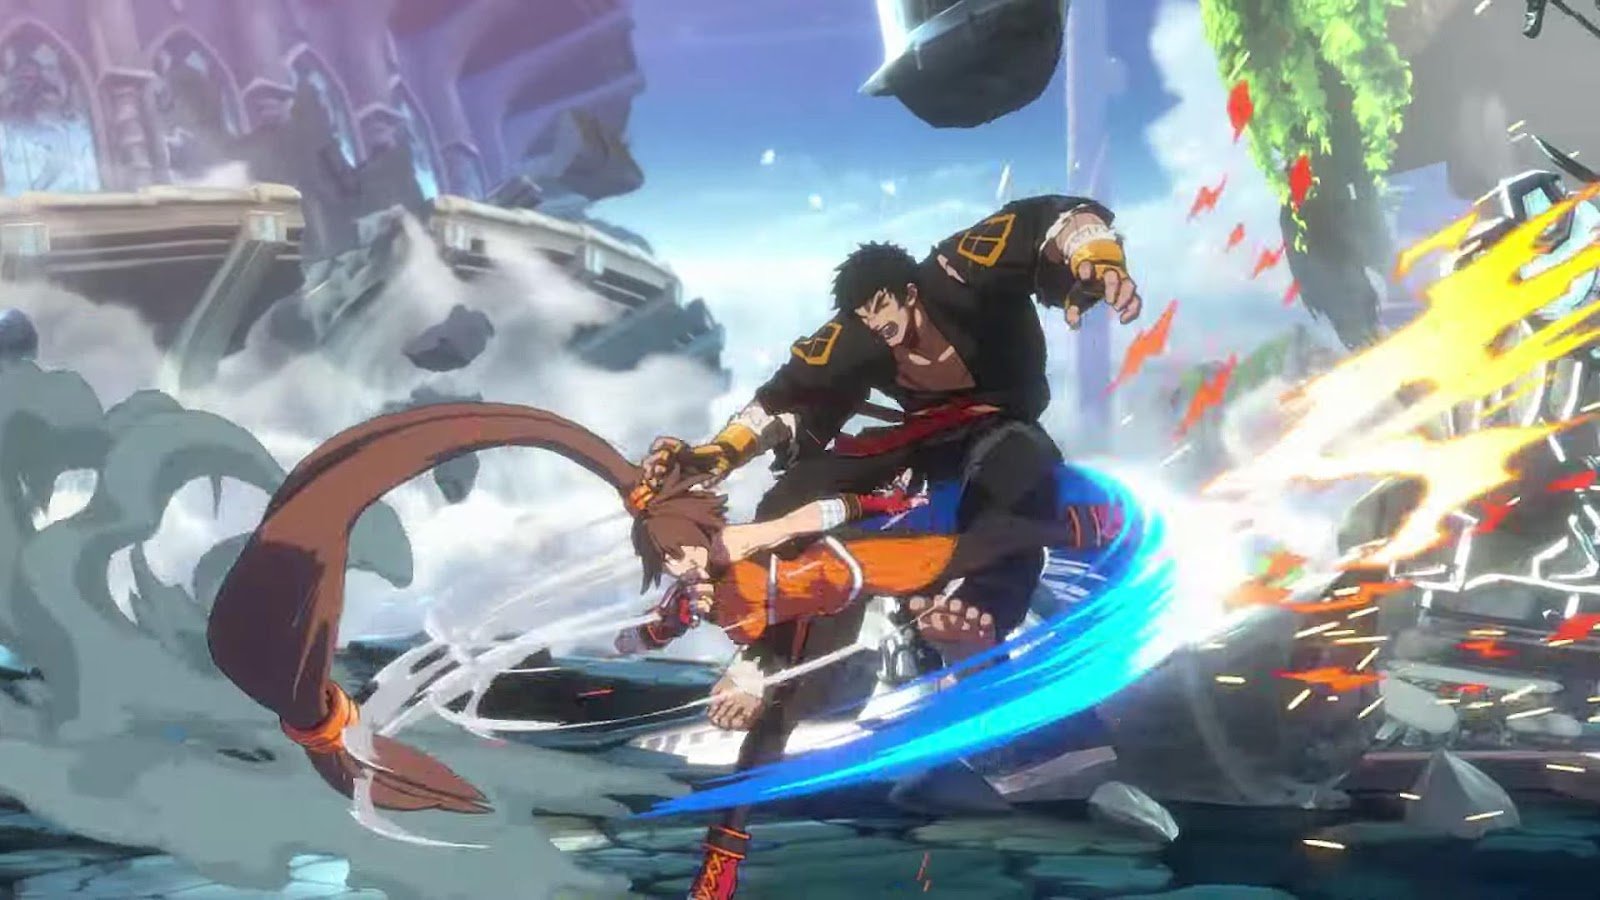 DNF Duel' Looks To Be The Next Great Fighting Game From the Creators of Guilty Gear